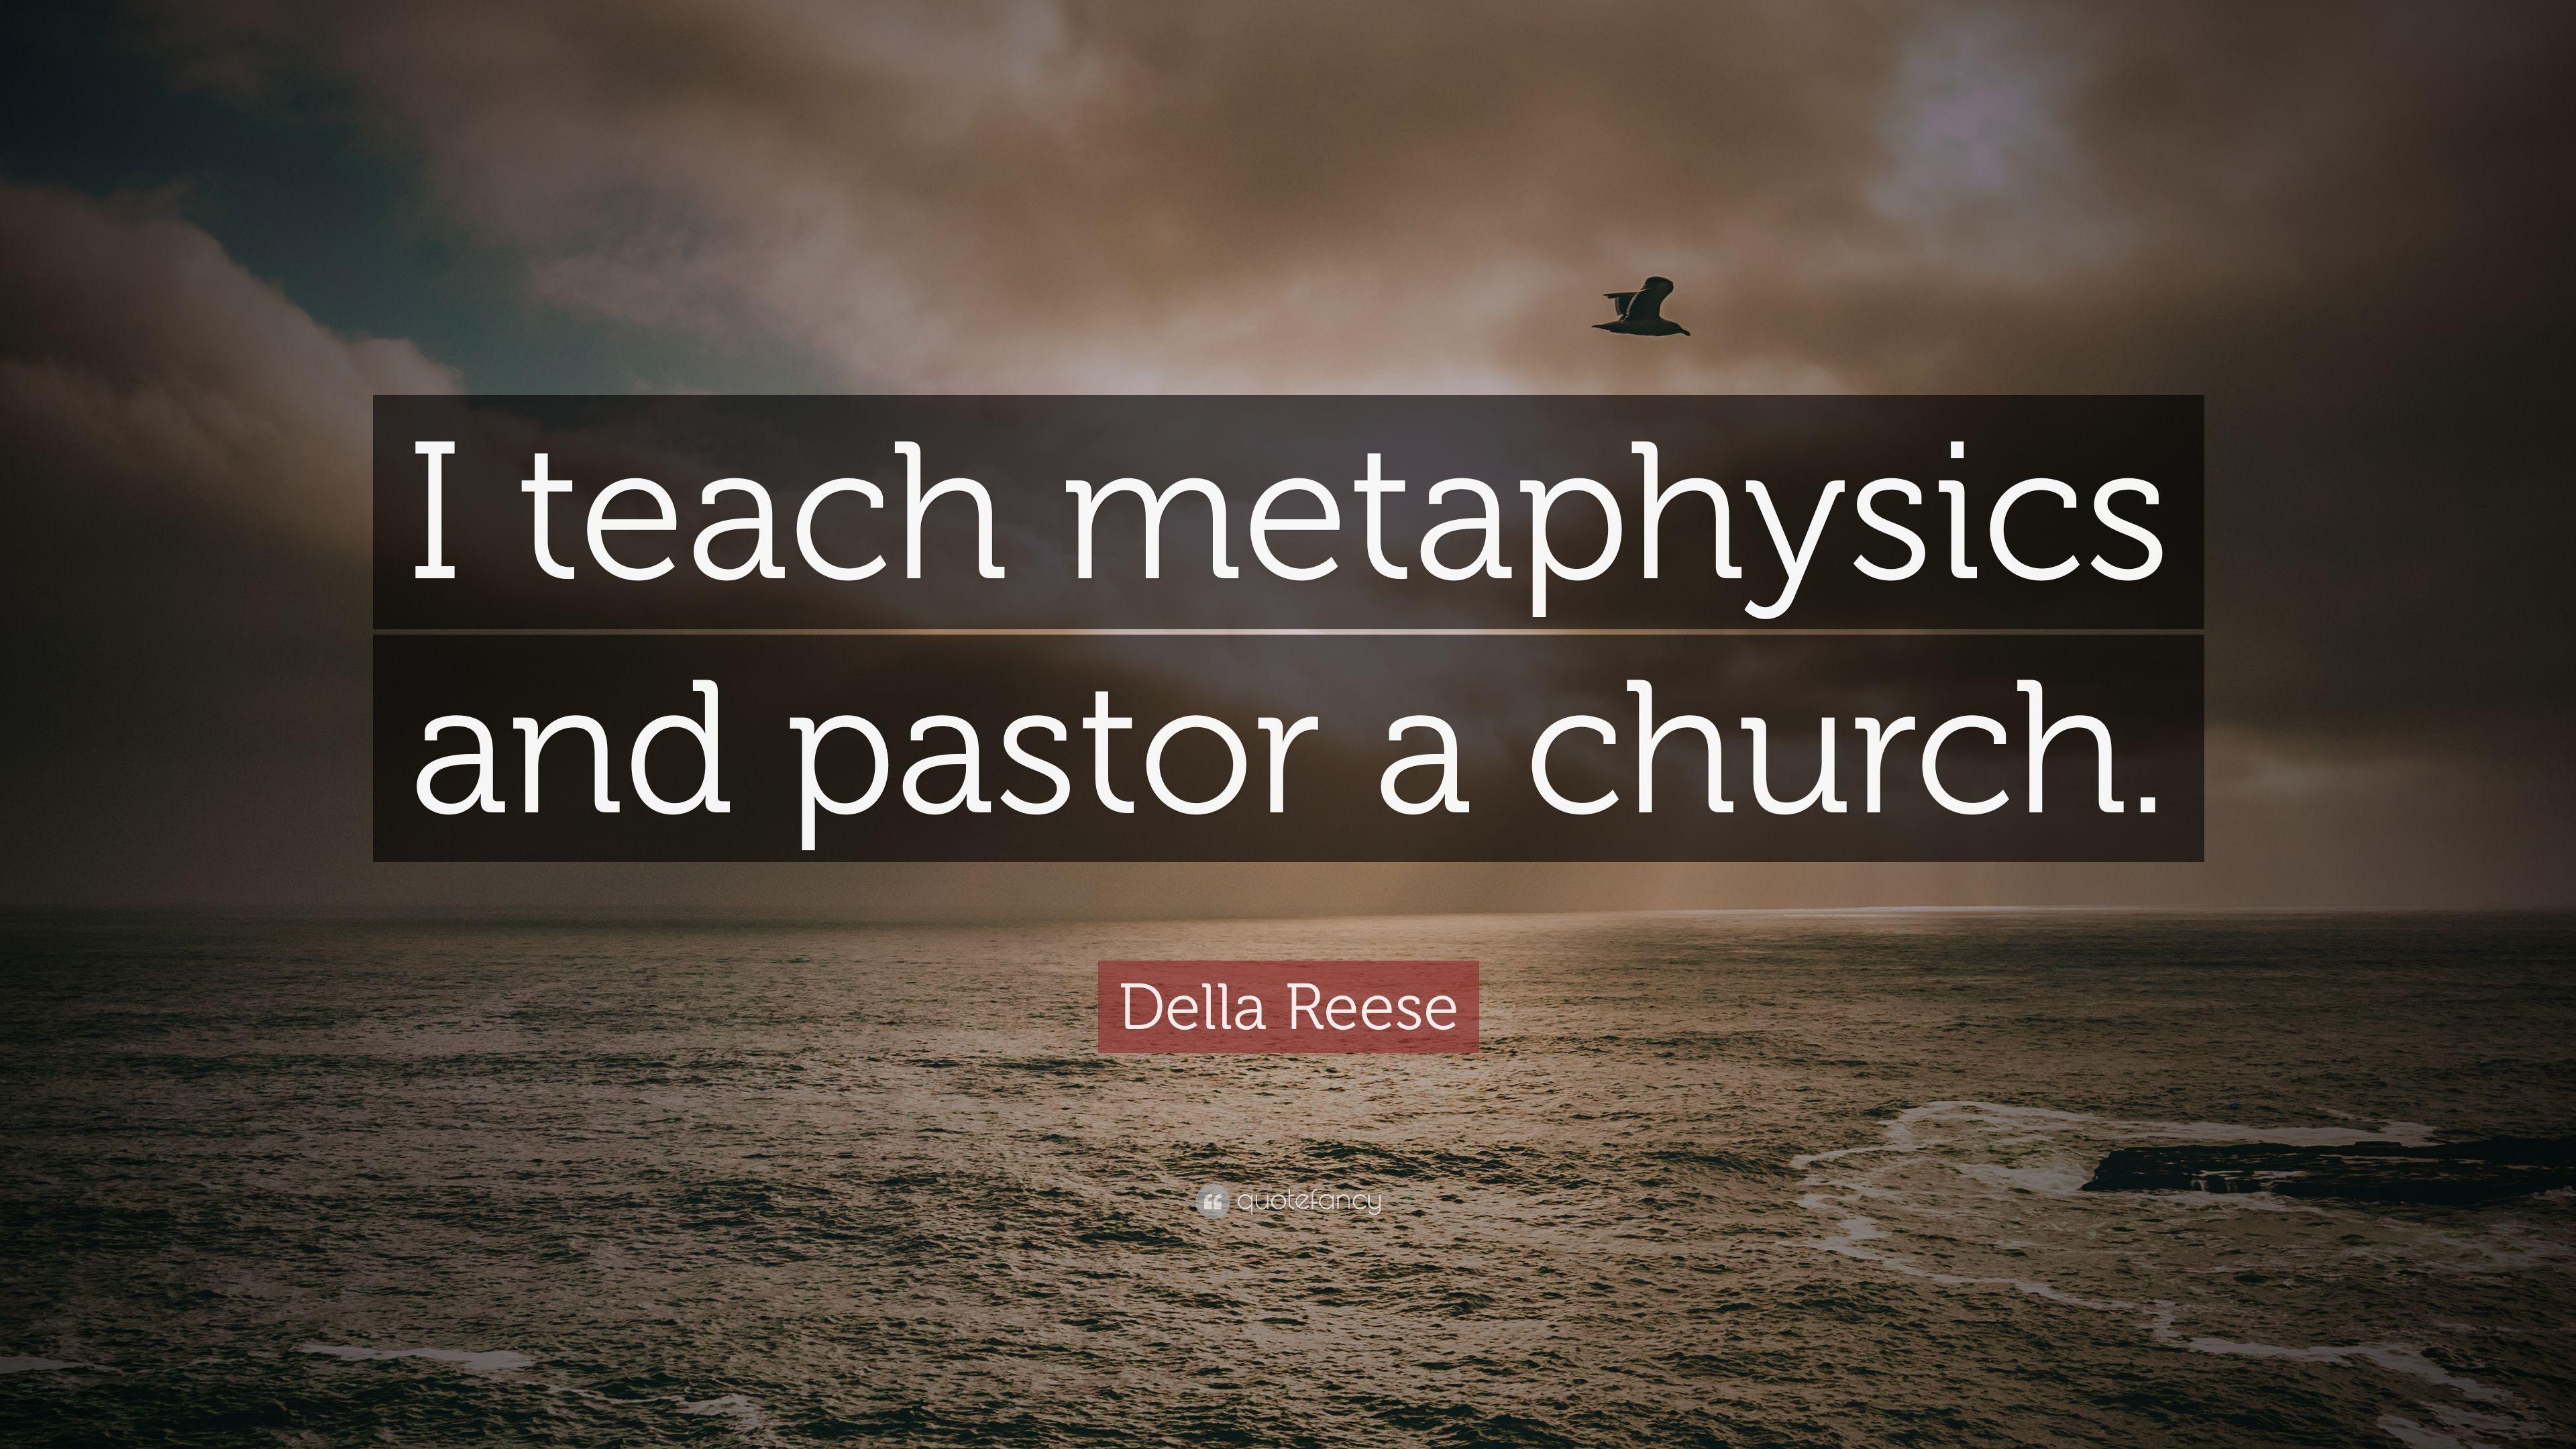 Della Reese Quote: “I teach metaphysics and pastor a church.” 5